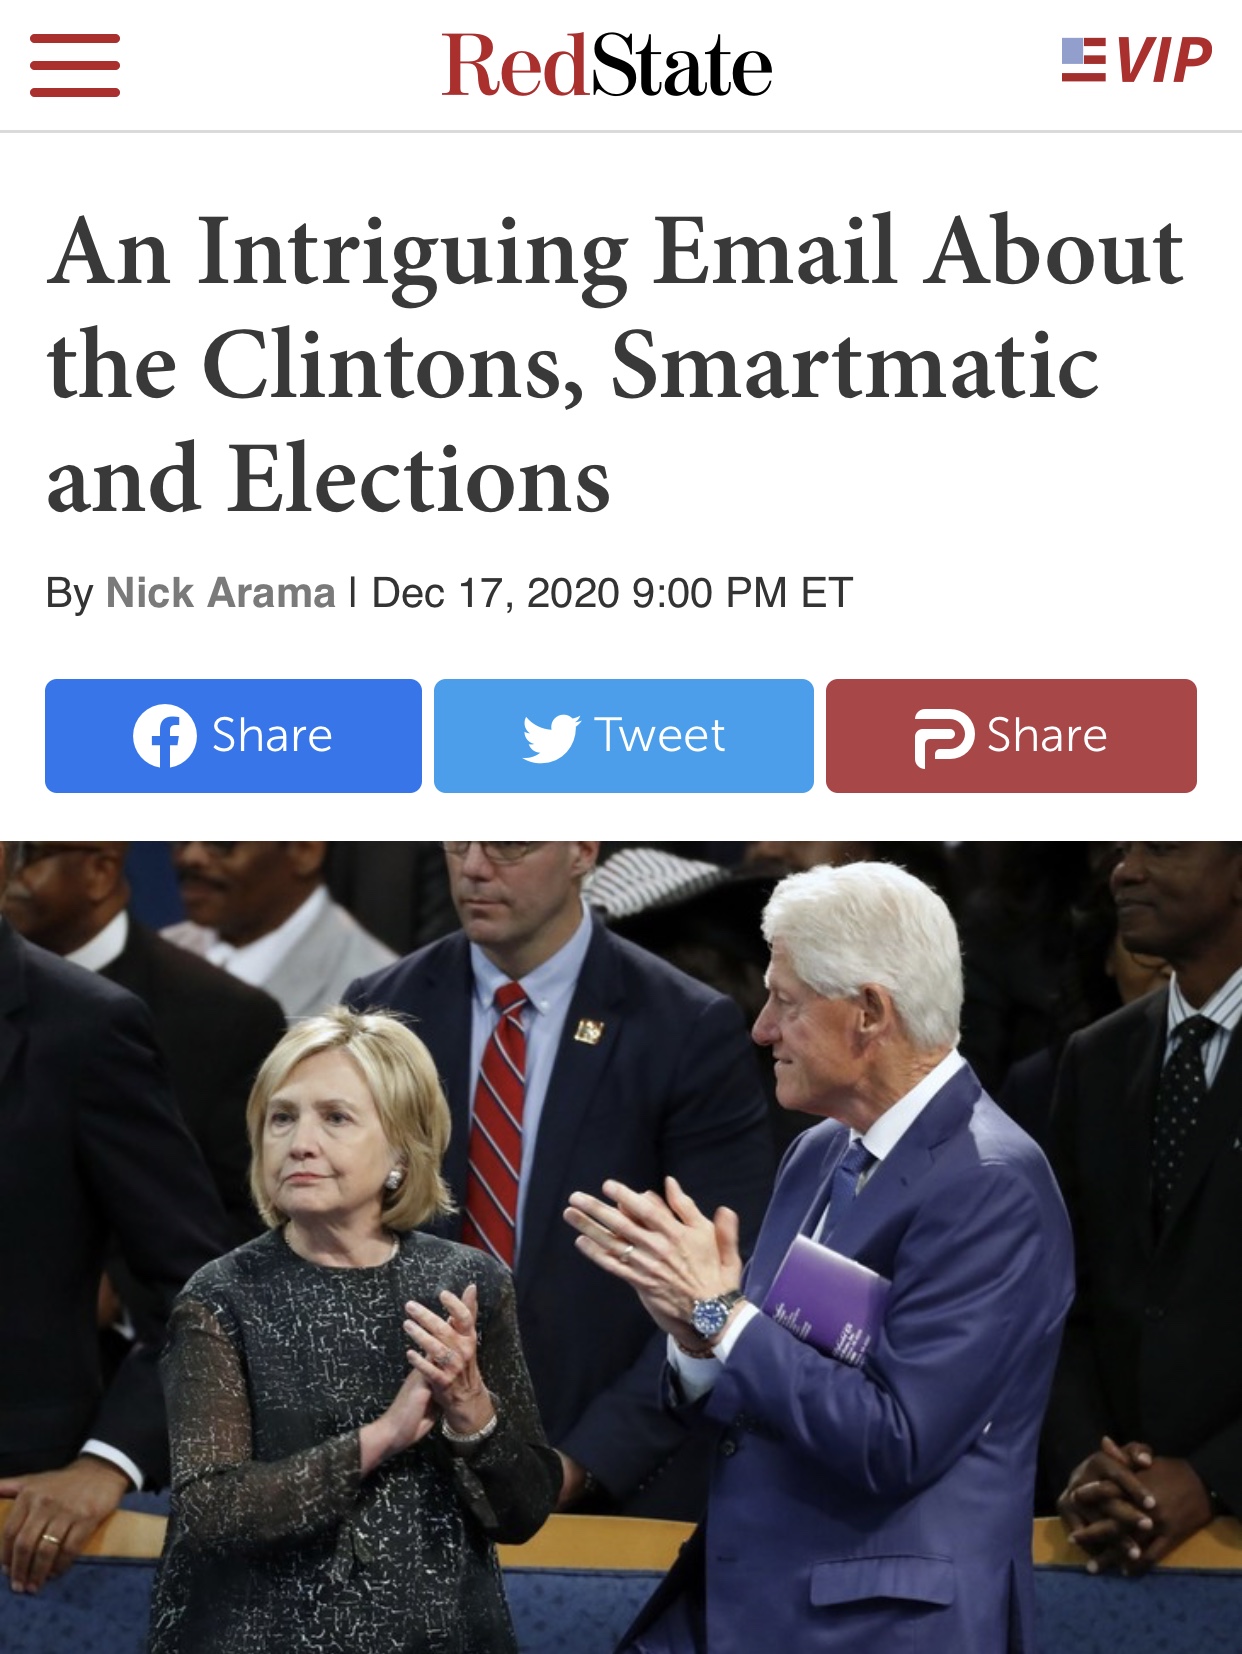 An Intriguing Email About the Clintons, Smartmatic and Elections